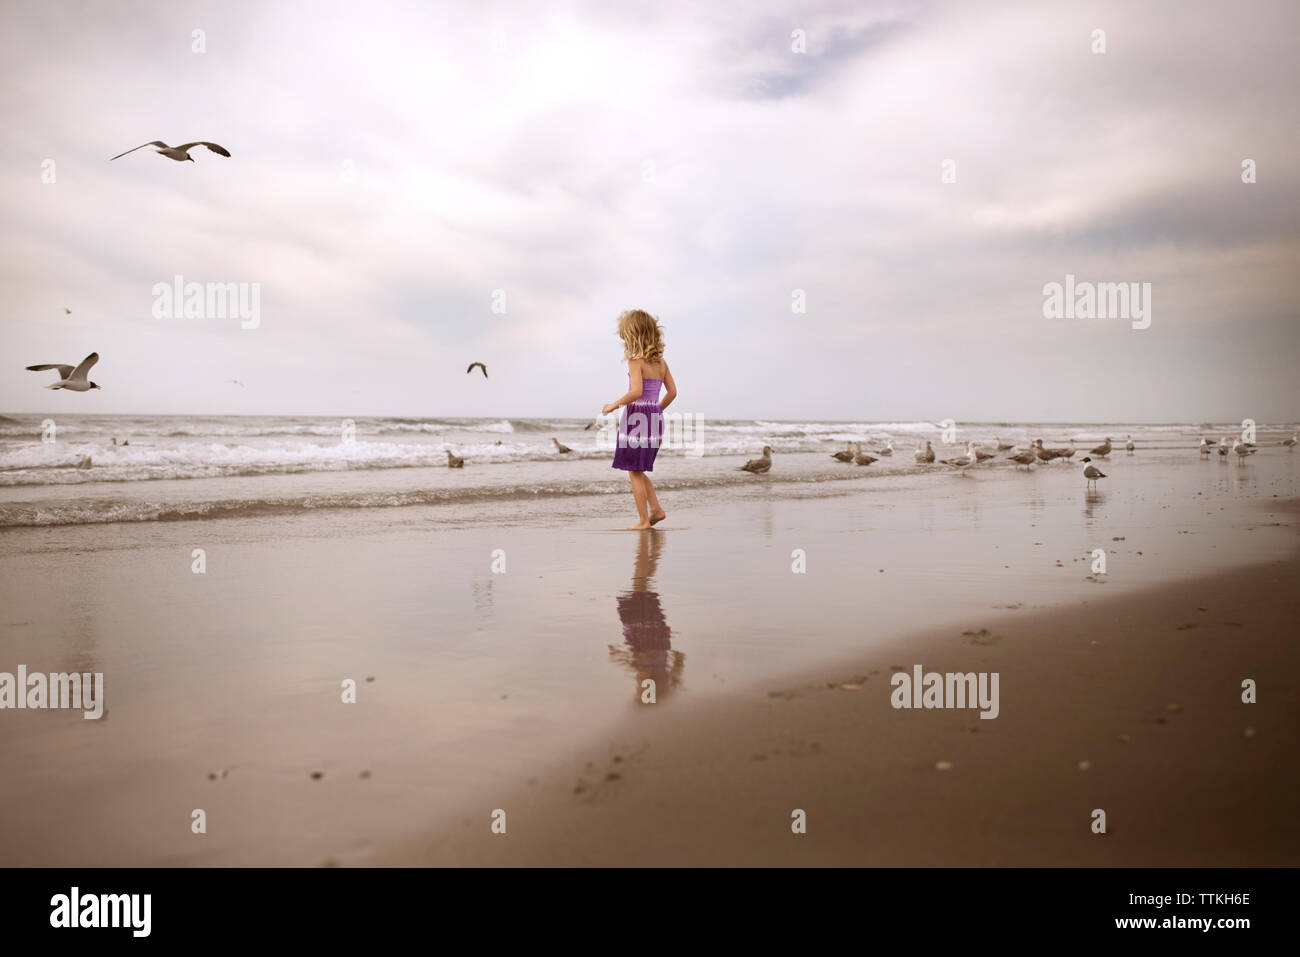 Rear view of girl enjoying with birds on beach against cloudy sky Stock Photo